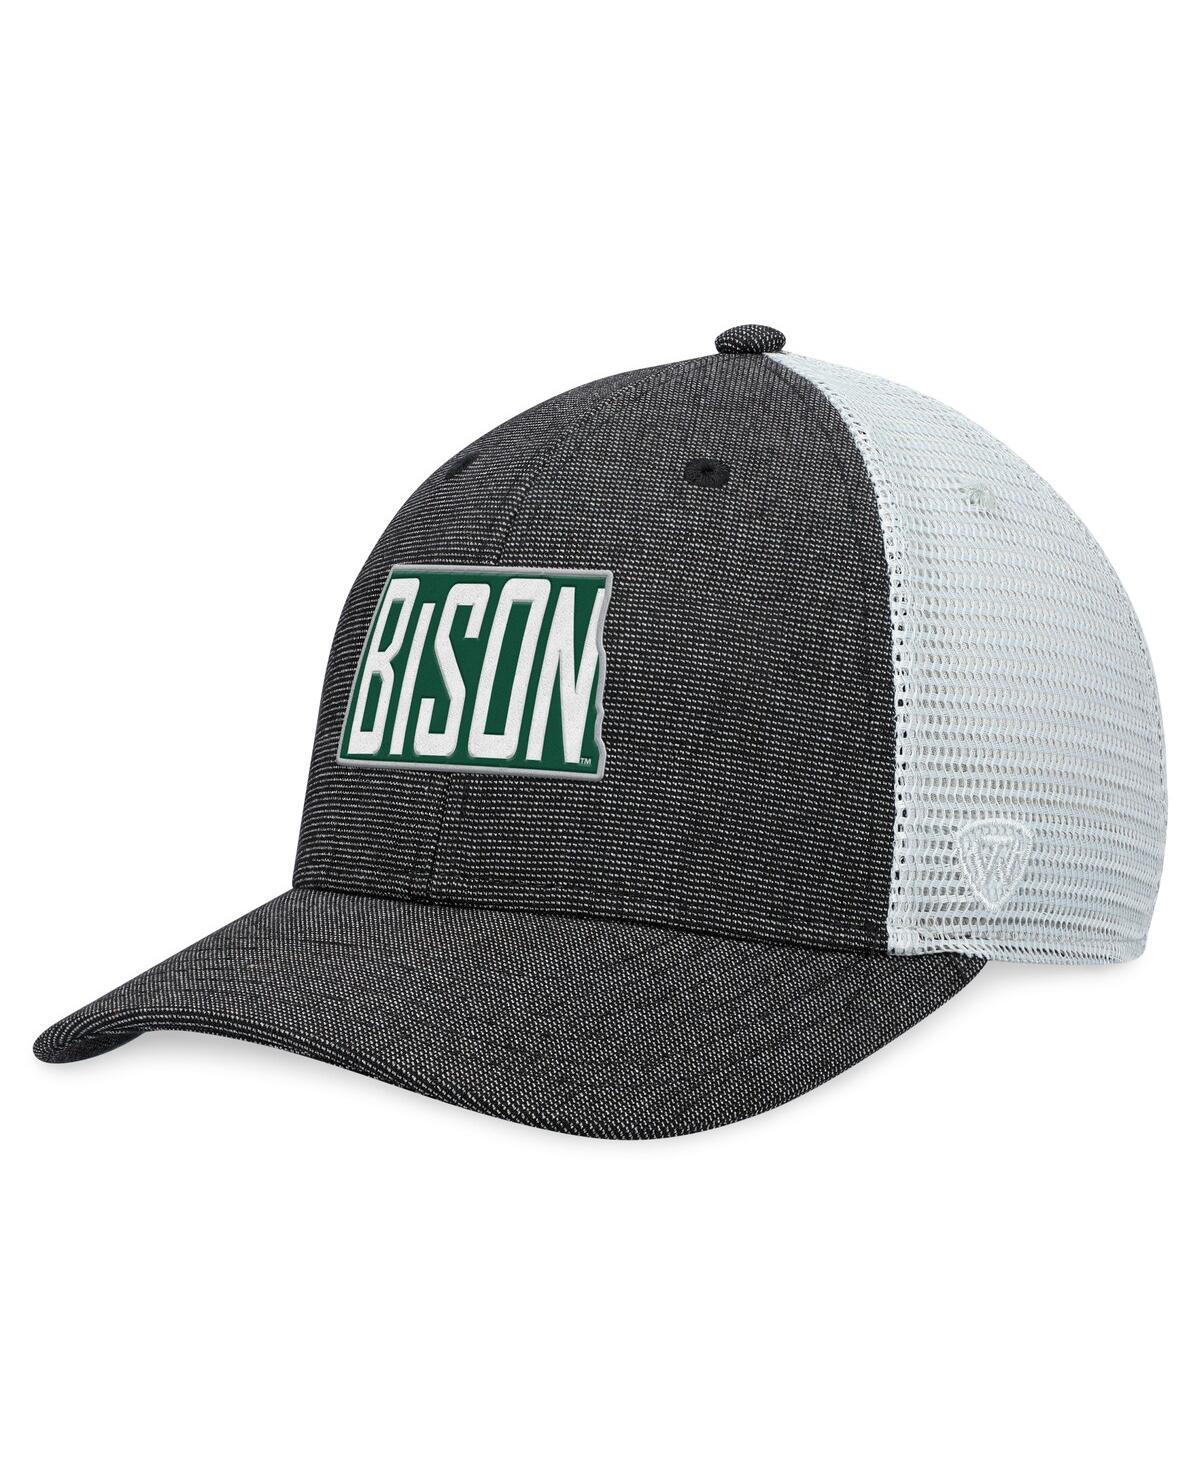 Shop Top Of The World Men's  Charcoal, White Ndsu Bison Townhall Trucker Snapback Hat In Charcoal,white